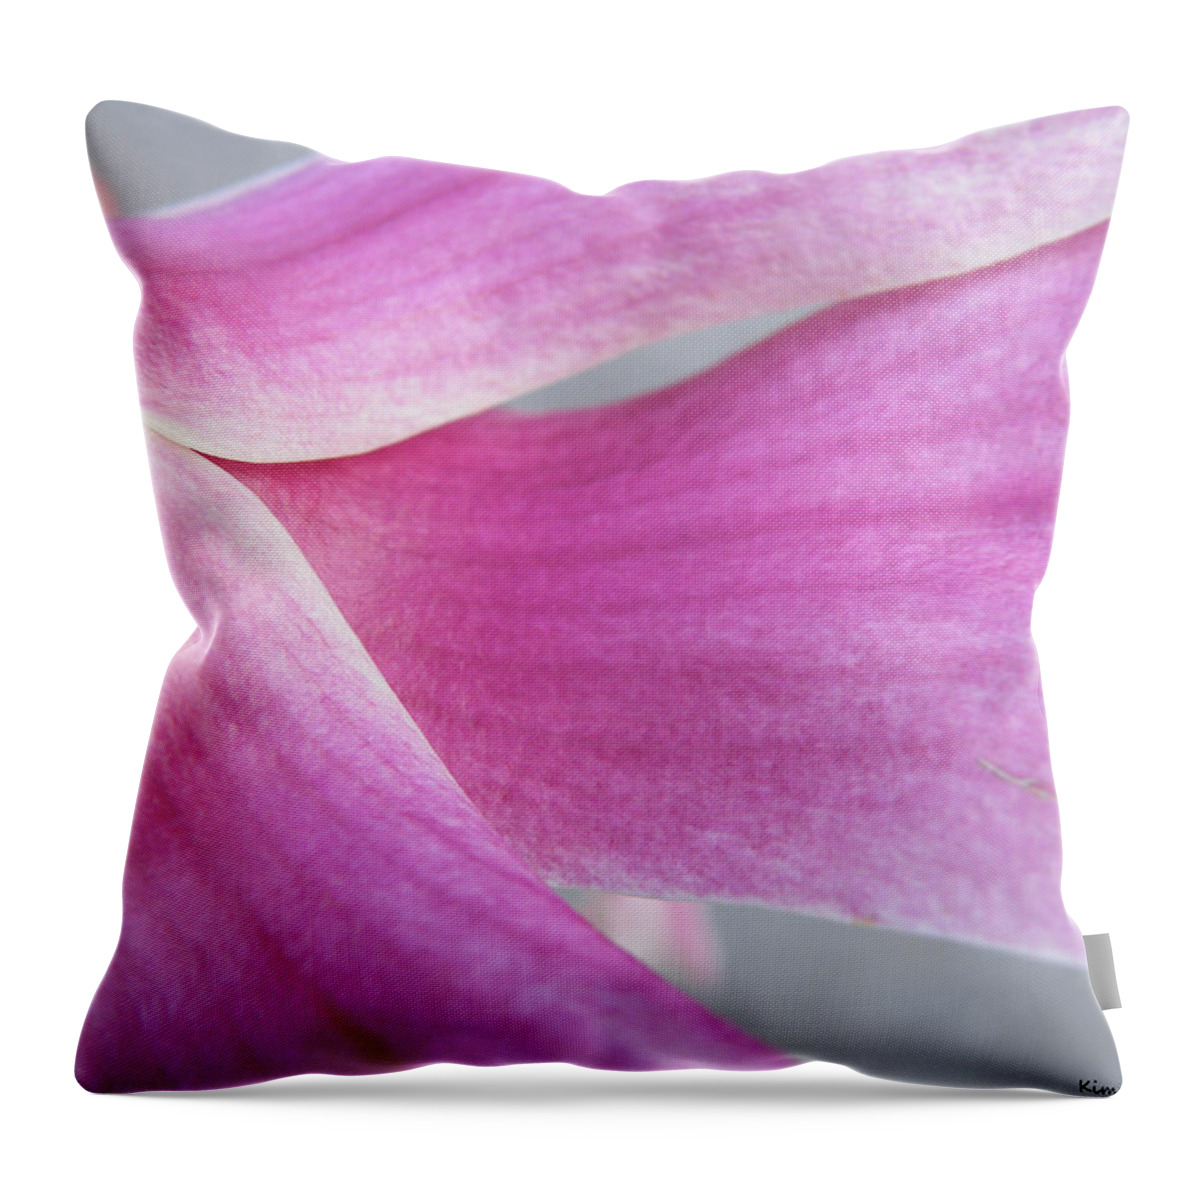 Botanical Throw Pillow featuring the photograph Magnolia in Half by Kimmary MacLean